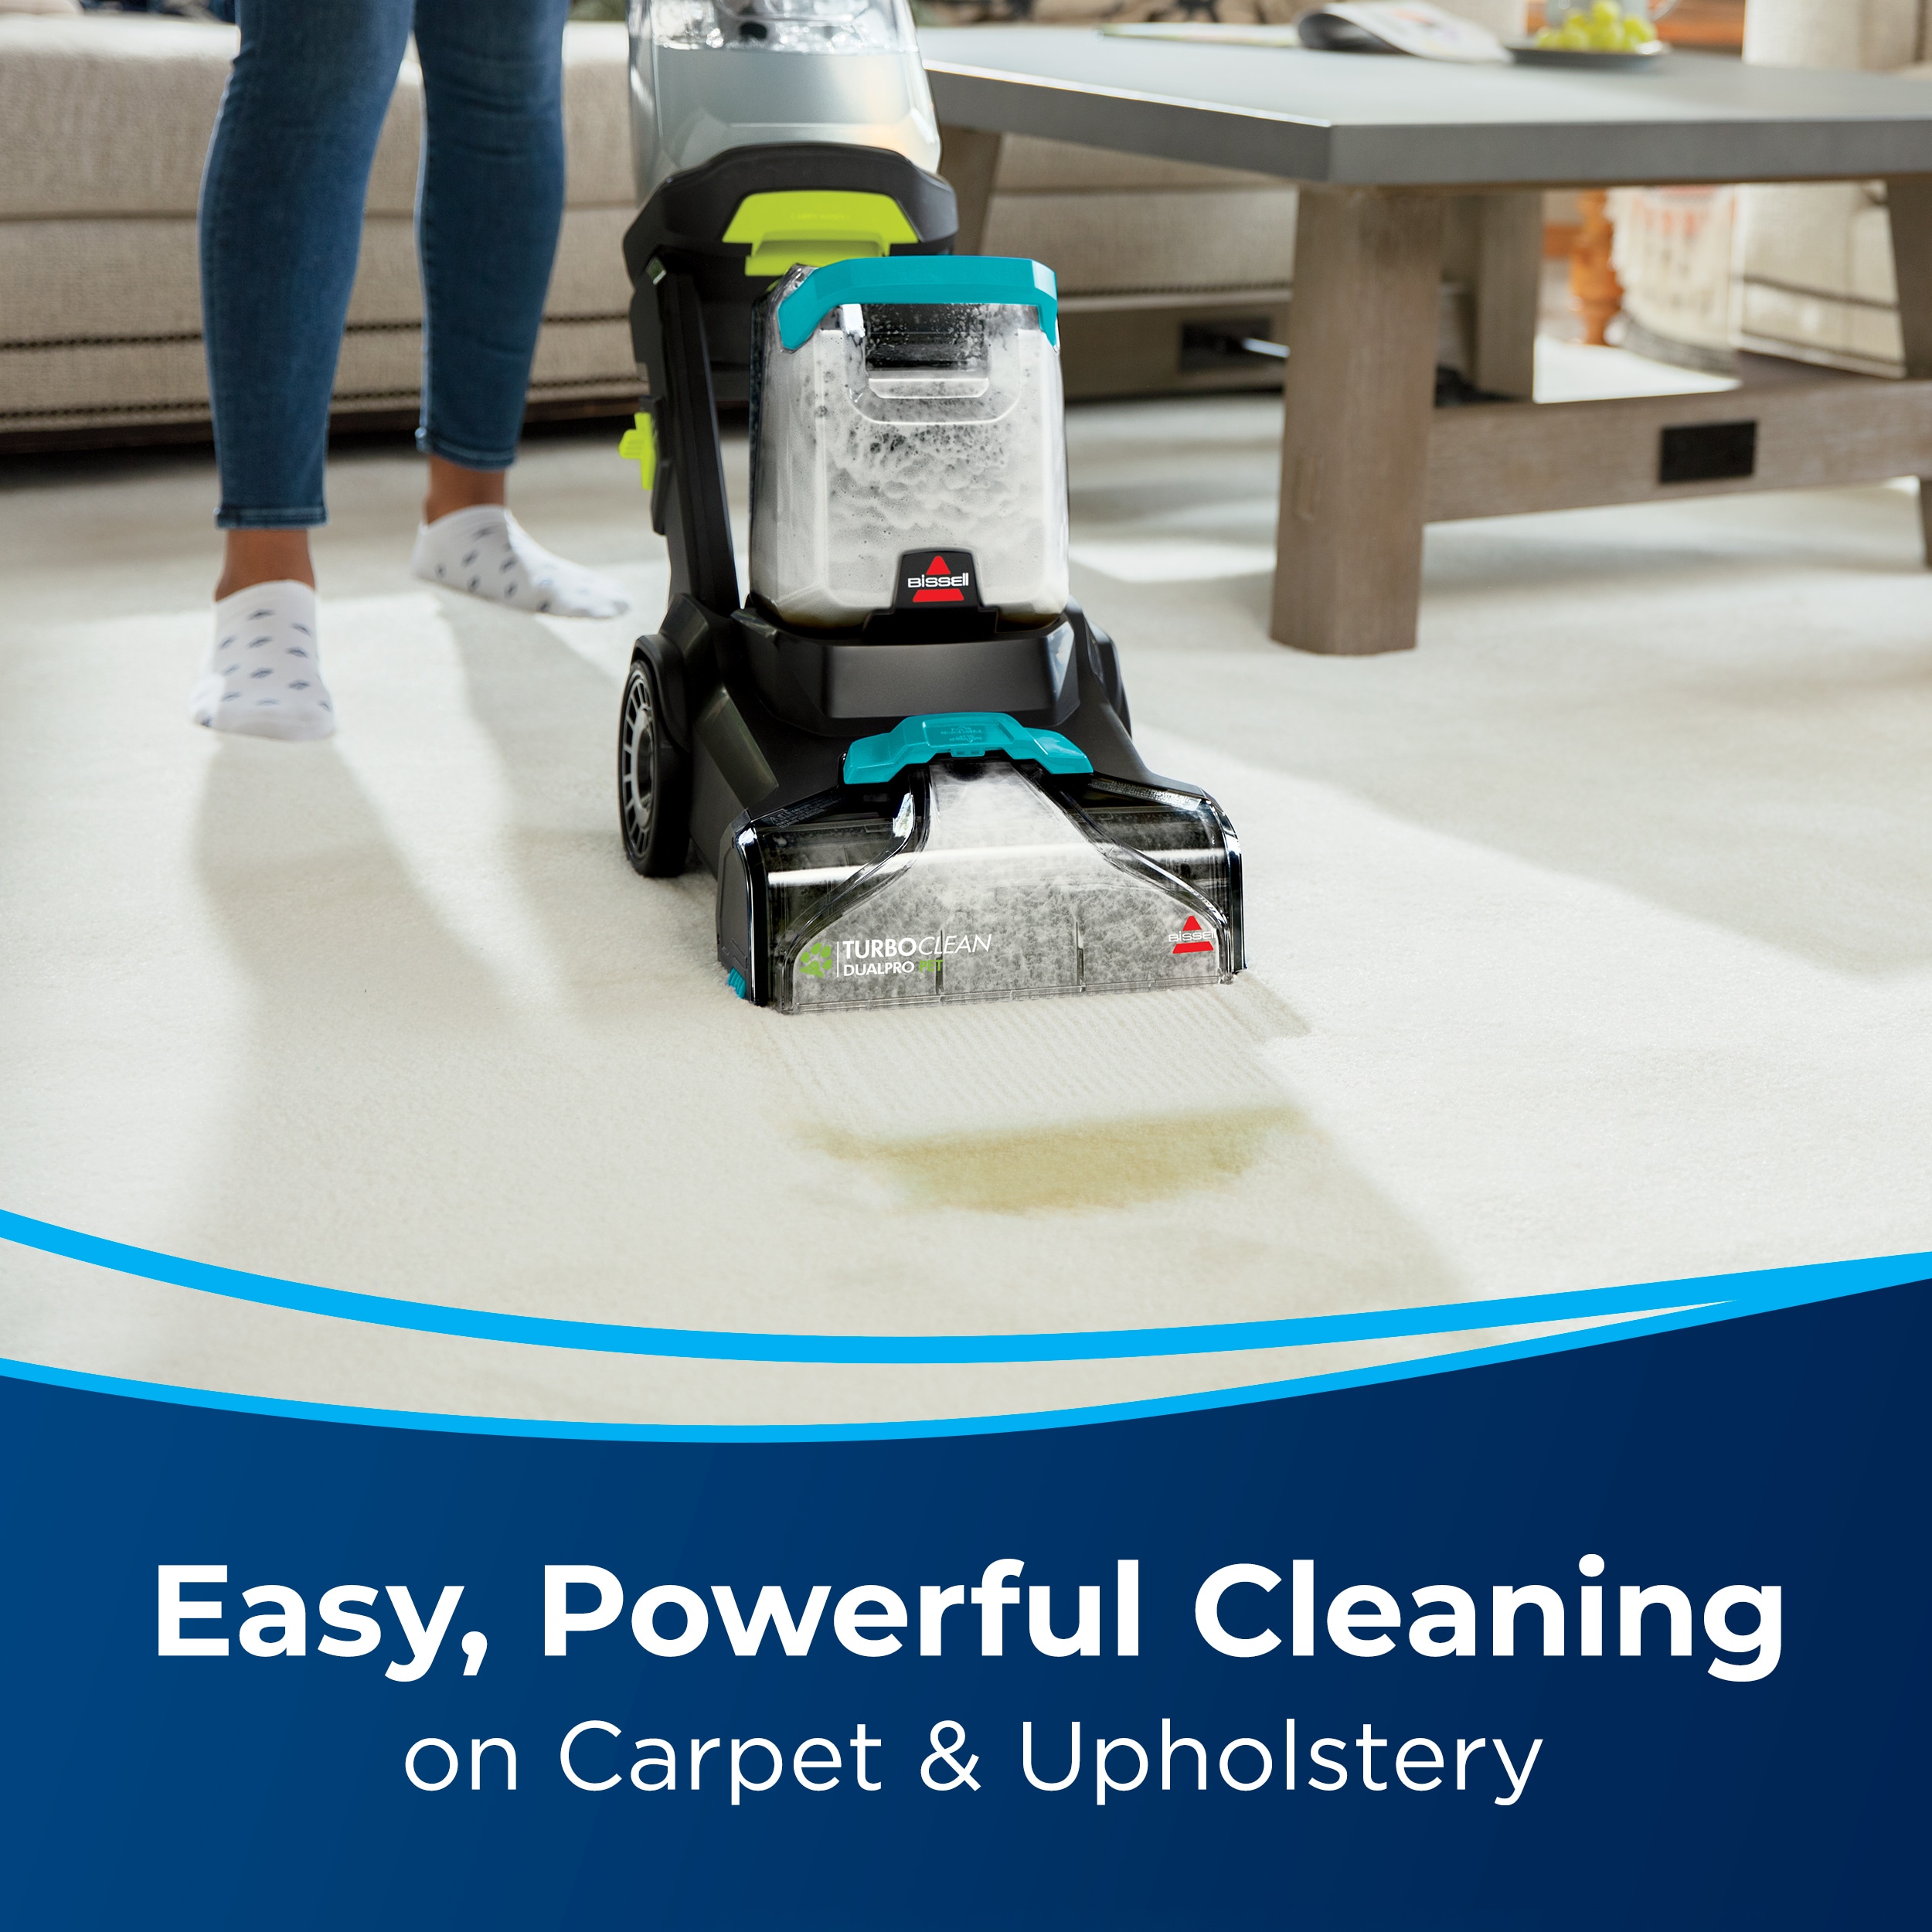 BISSELL Carpet Cleaners at